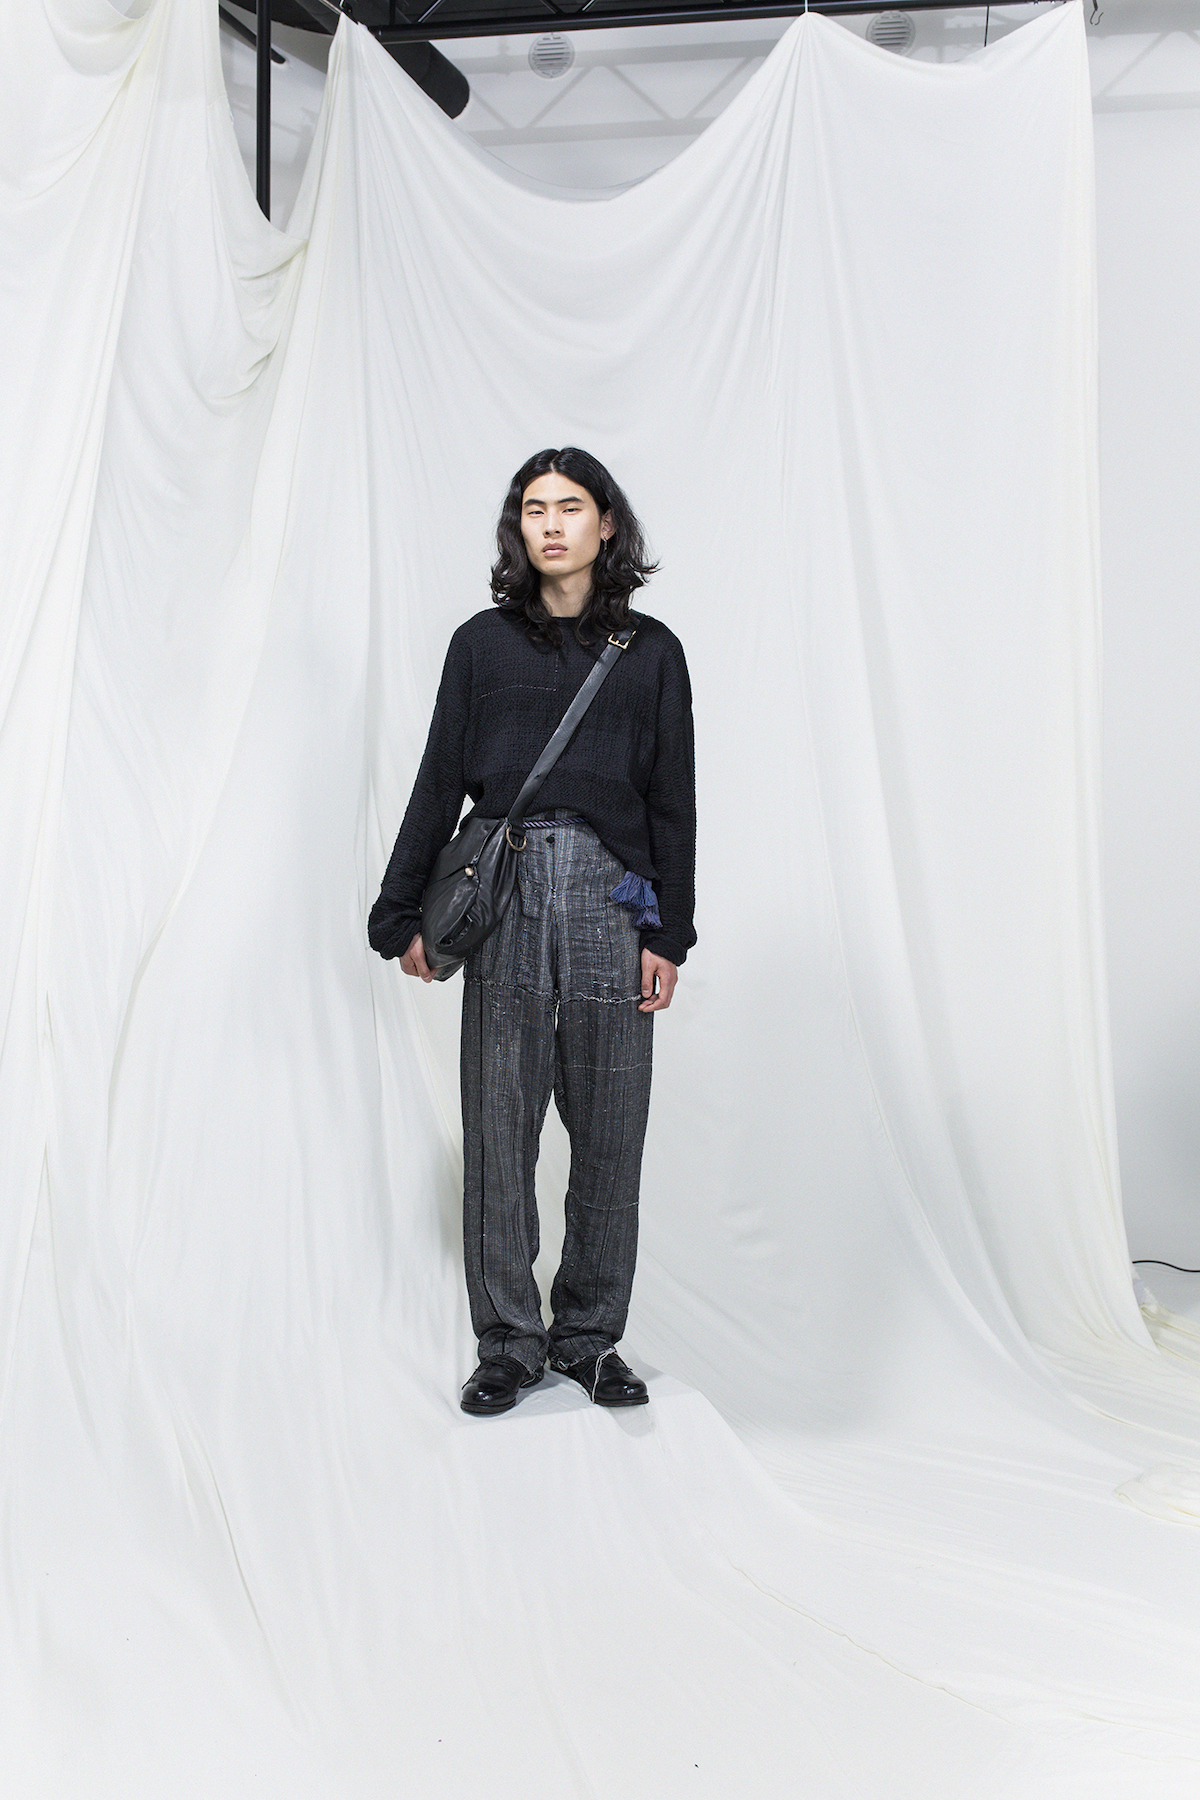 Model is wearing a oversized black sweater, oversized grey trousers and black leather crossbody bag